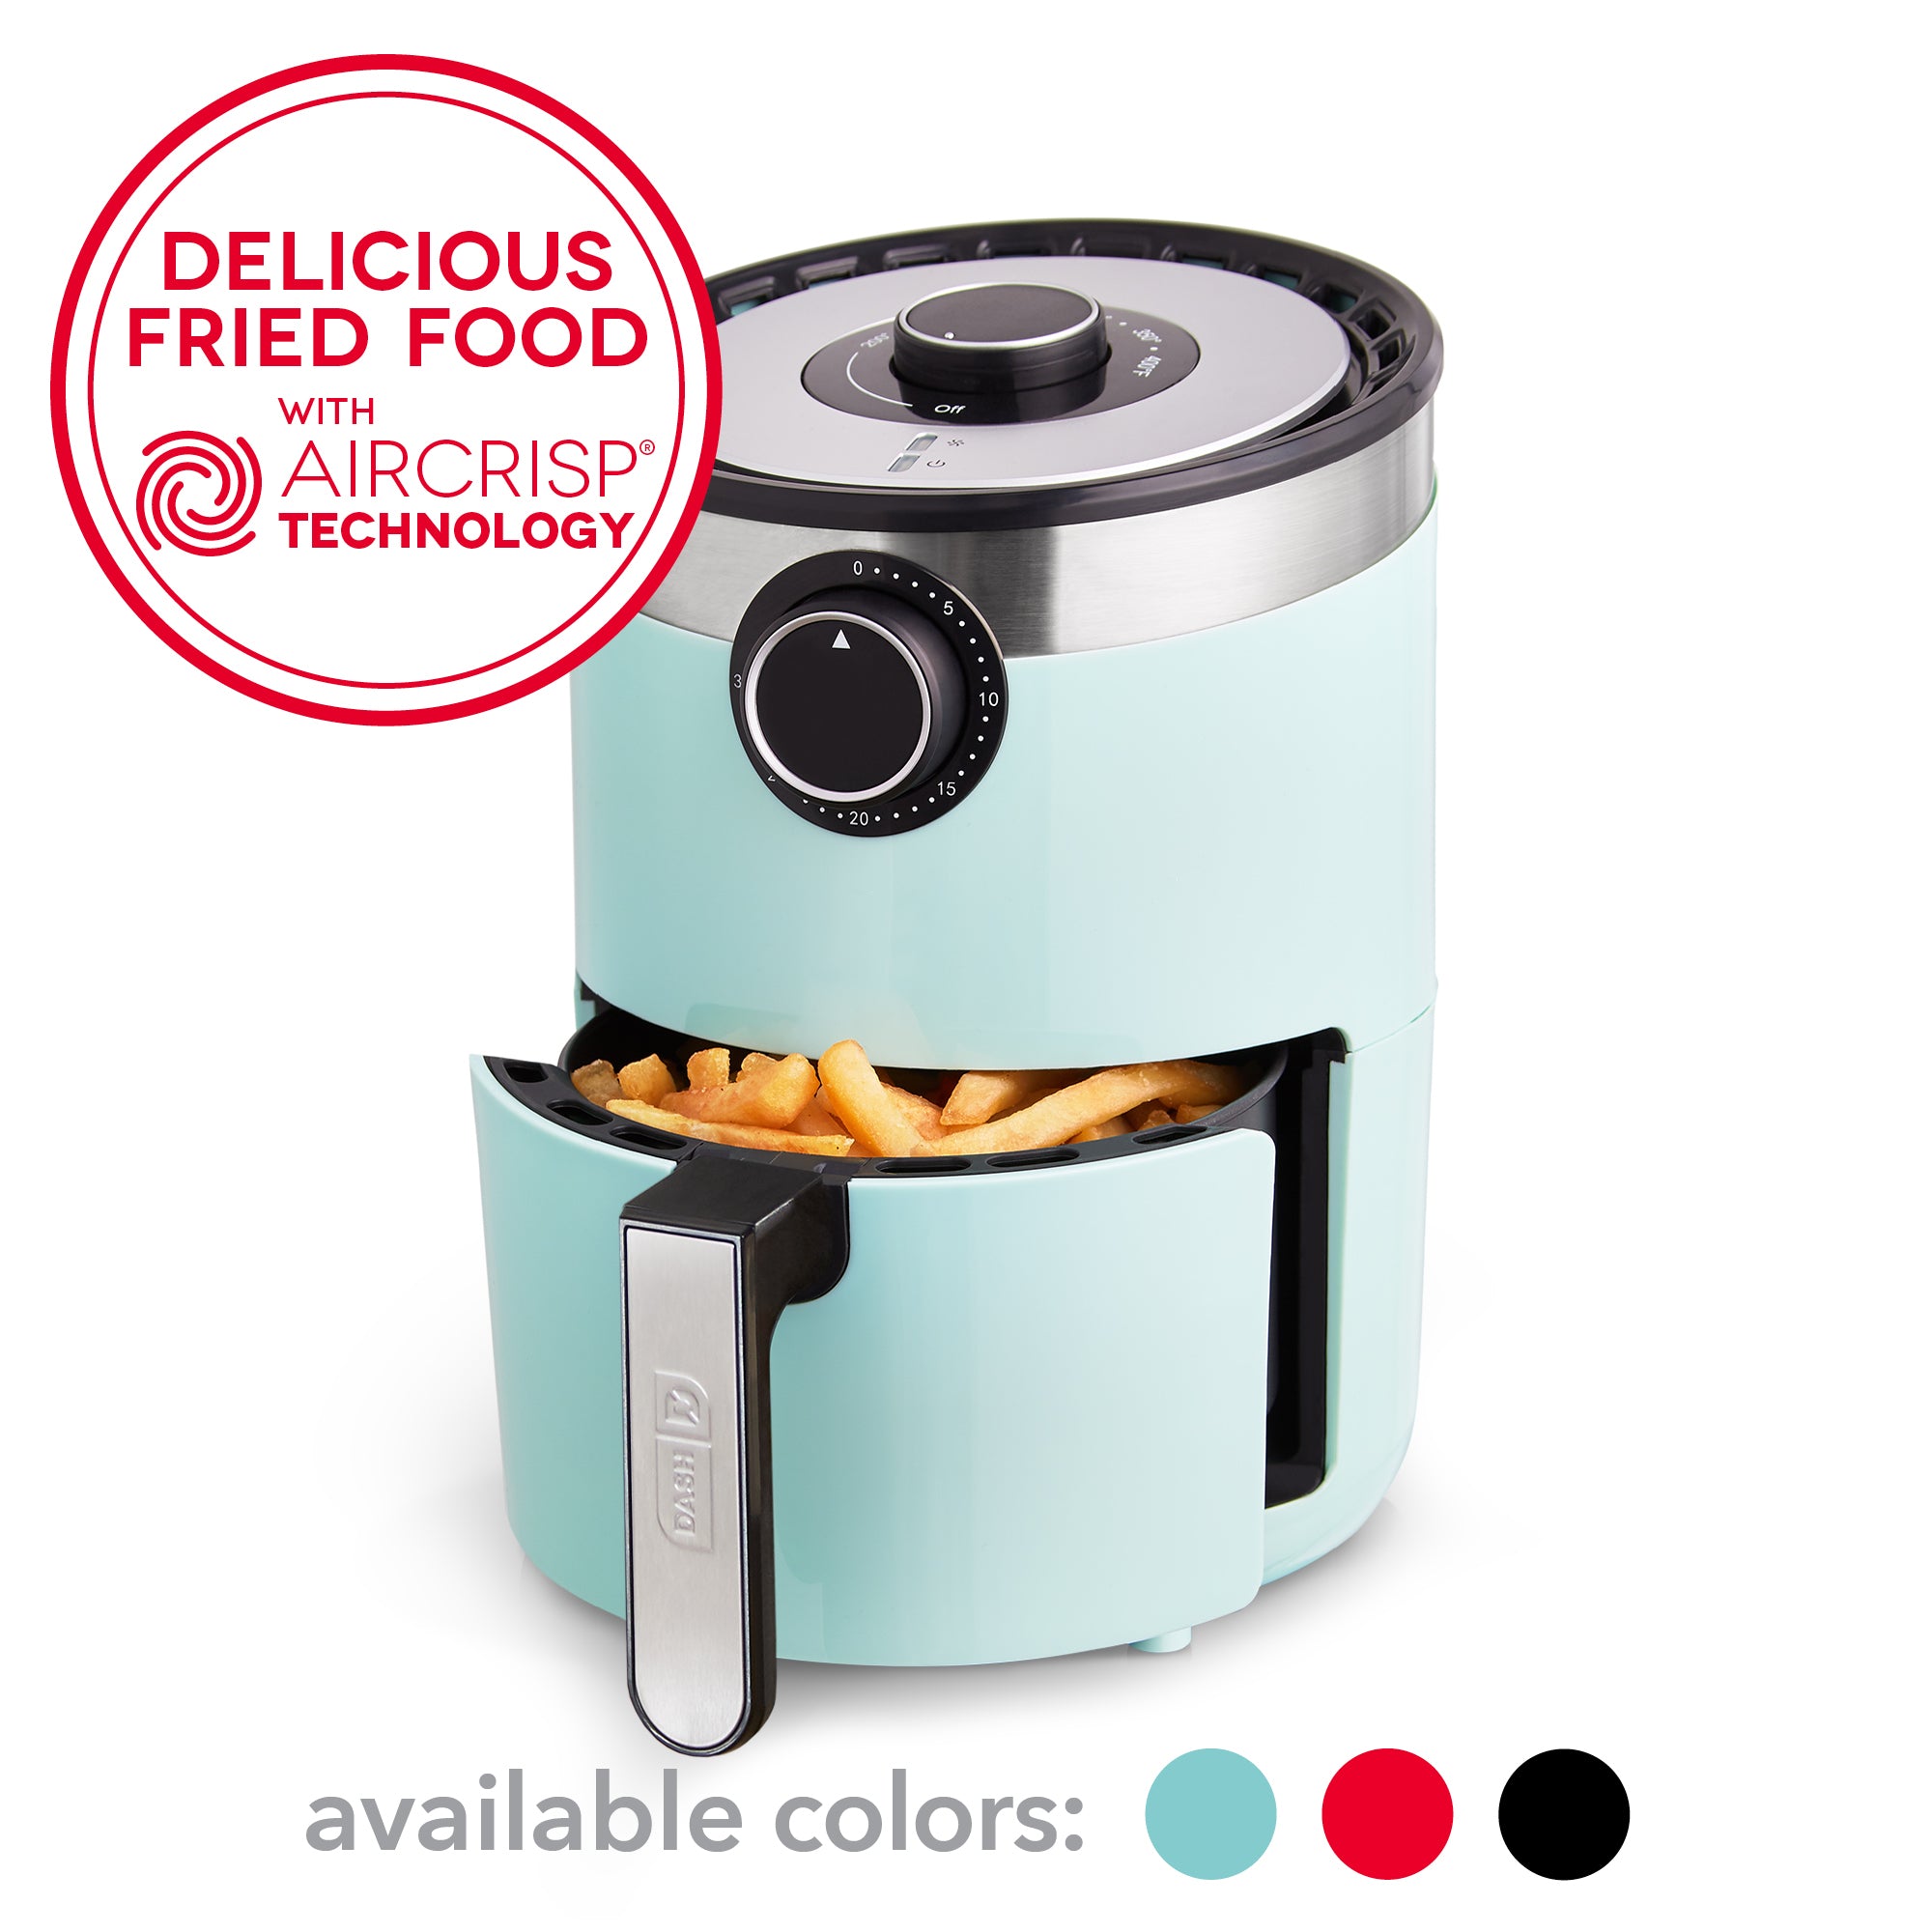 Cook Meals Faster and Healthier With the Dreo Aircrisp Pro Max Air